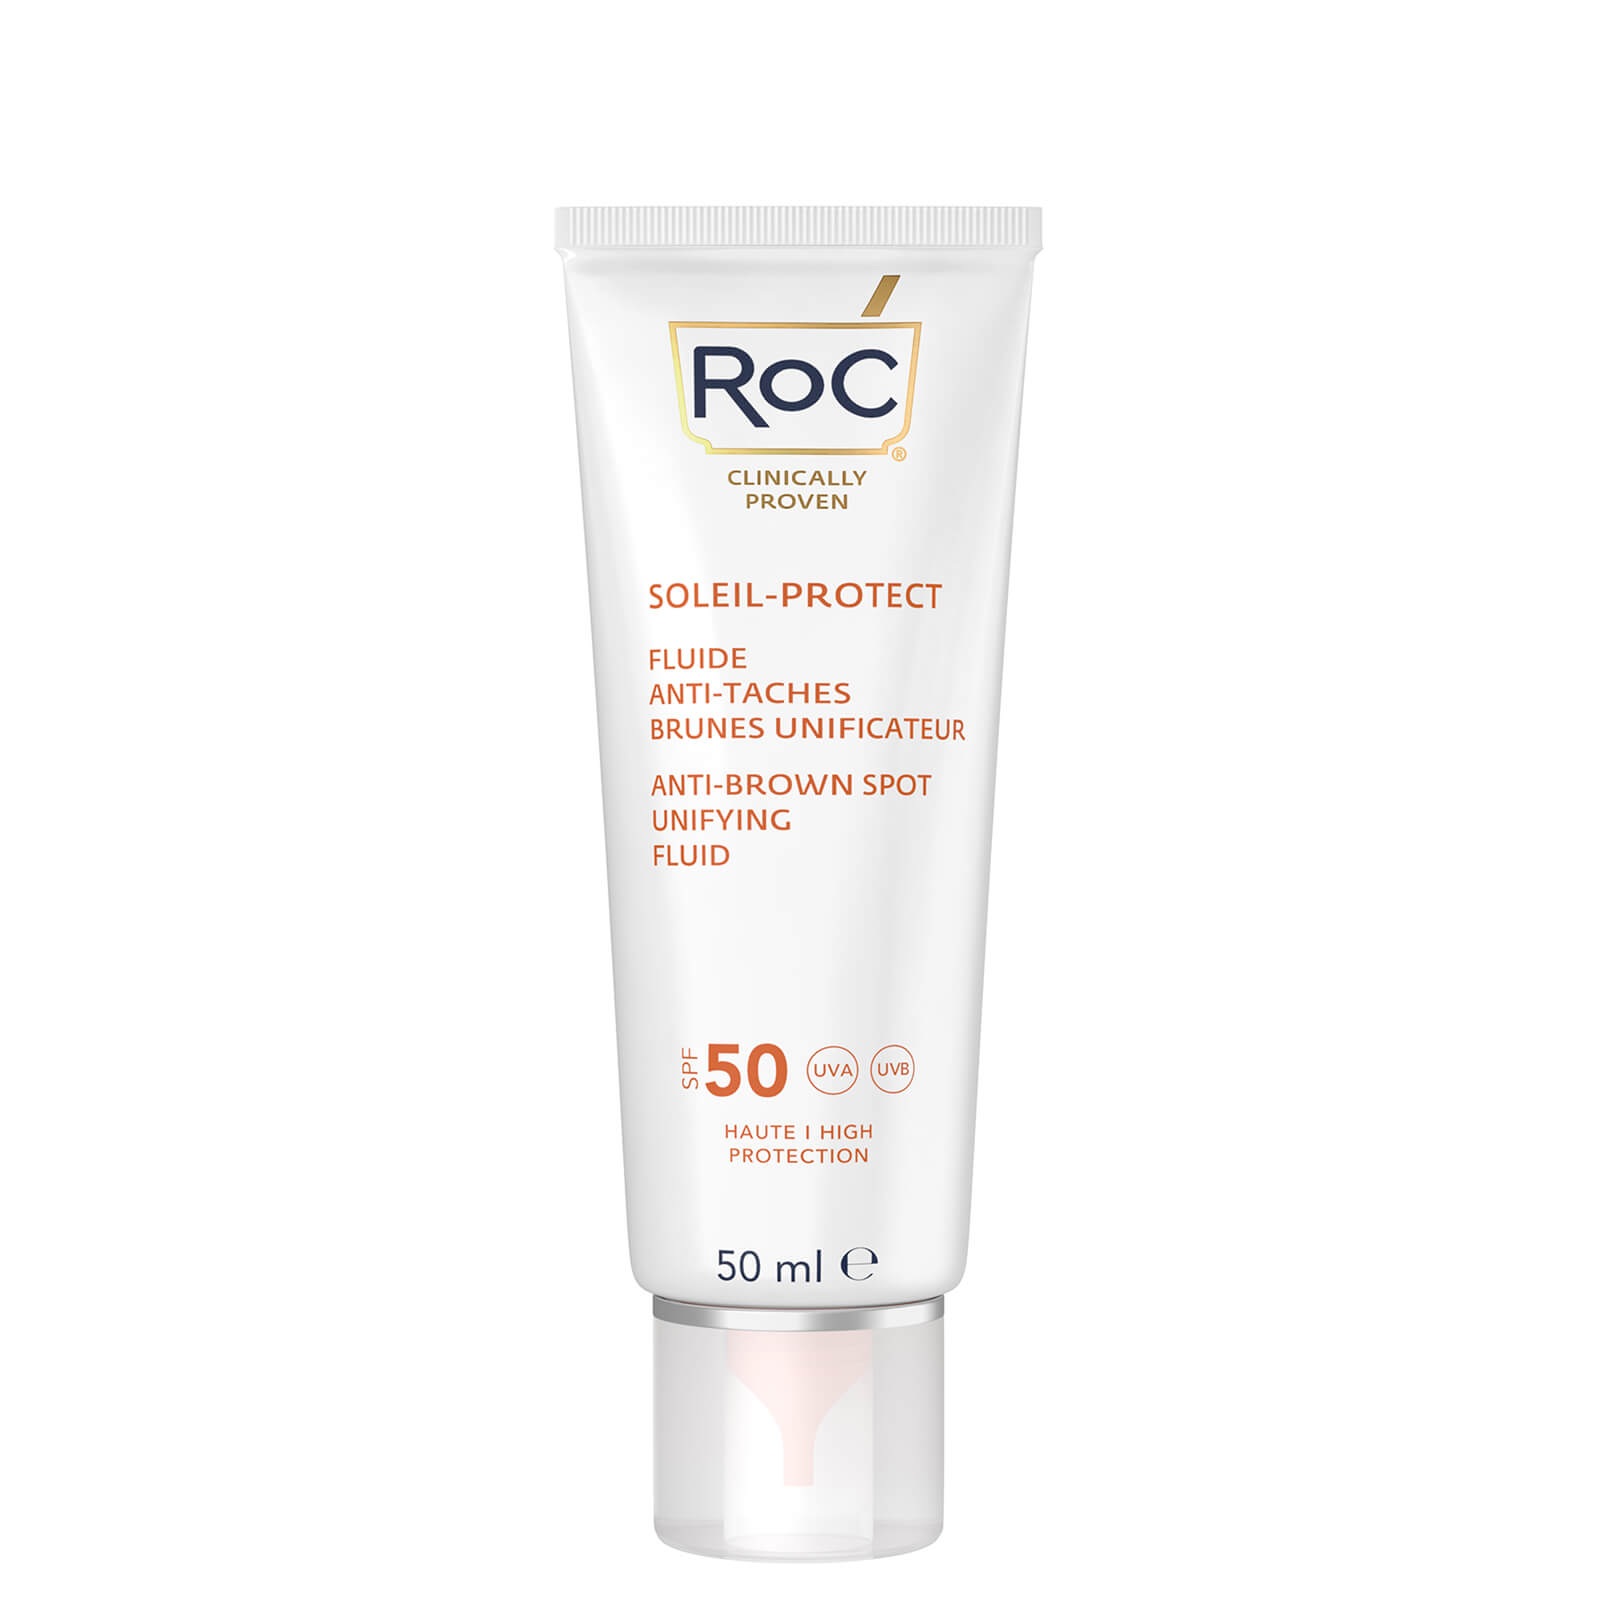 Roc Skincare - Roc soleil-protect anti-brown spot unifying fluid spf50 50ml